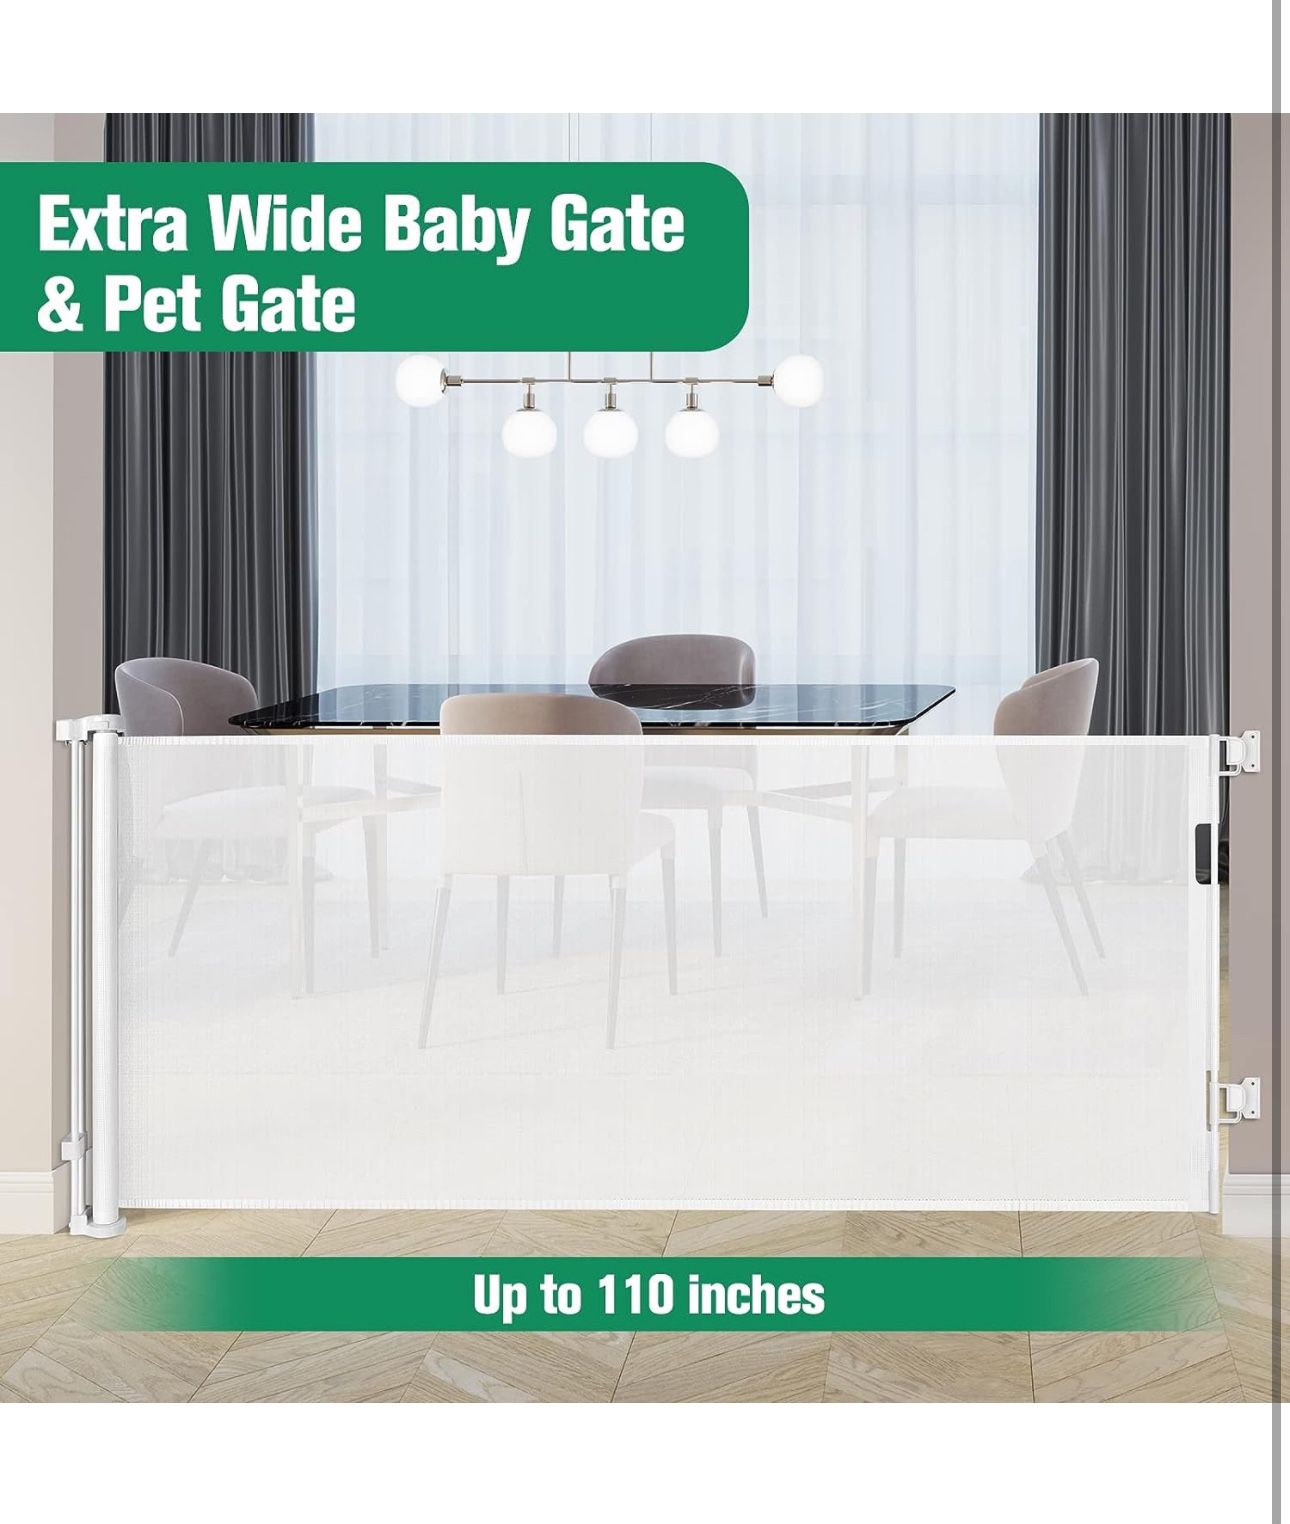 Mom's Choice Awards Winner - 110 Inch Extra Wide Baby Gate for Large Openings Retractable Baby Gates Indoor Outdoor Extra Long Baby Gate for Doorway 